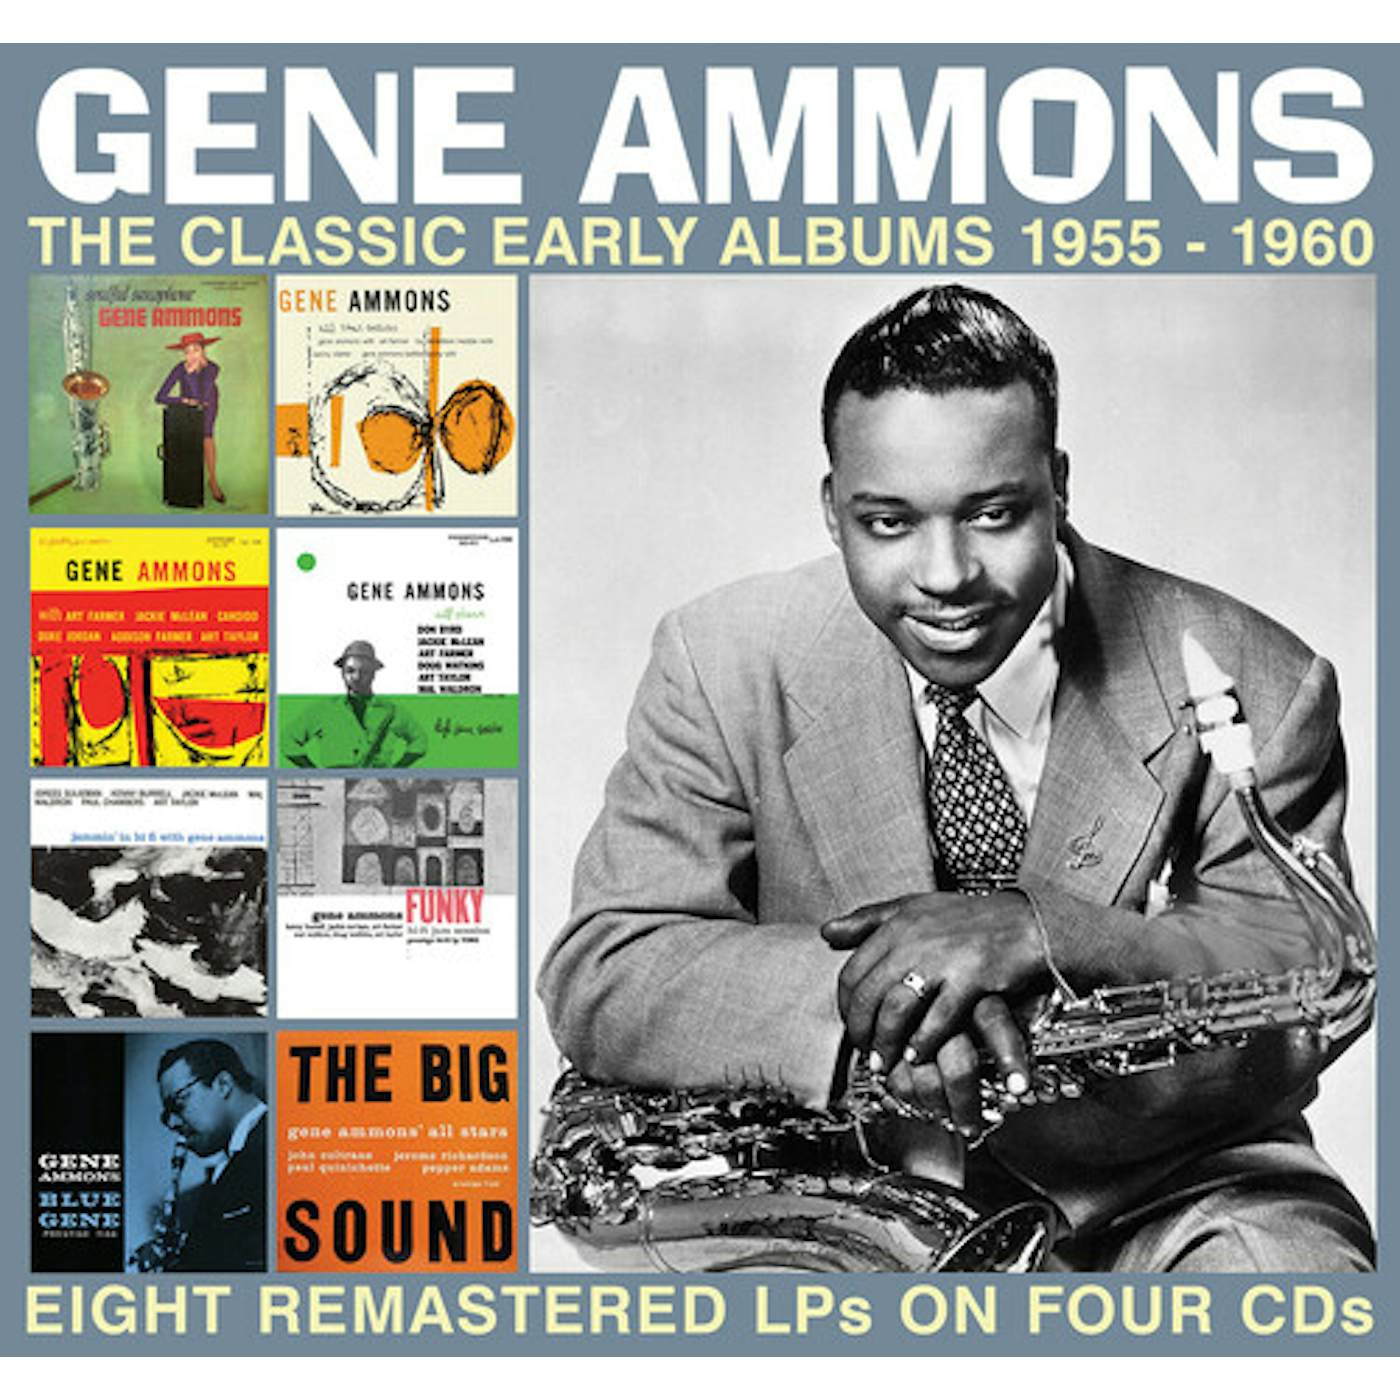 Gene Ammons THE CLASSIC EARLY ALBUMS 1955-1960 CD